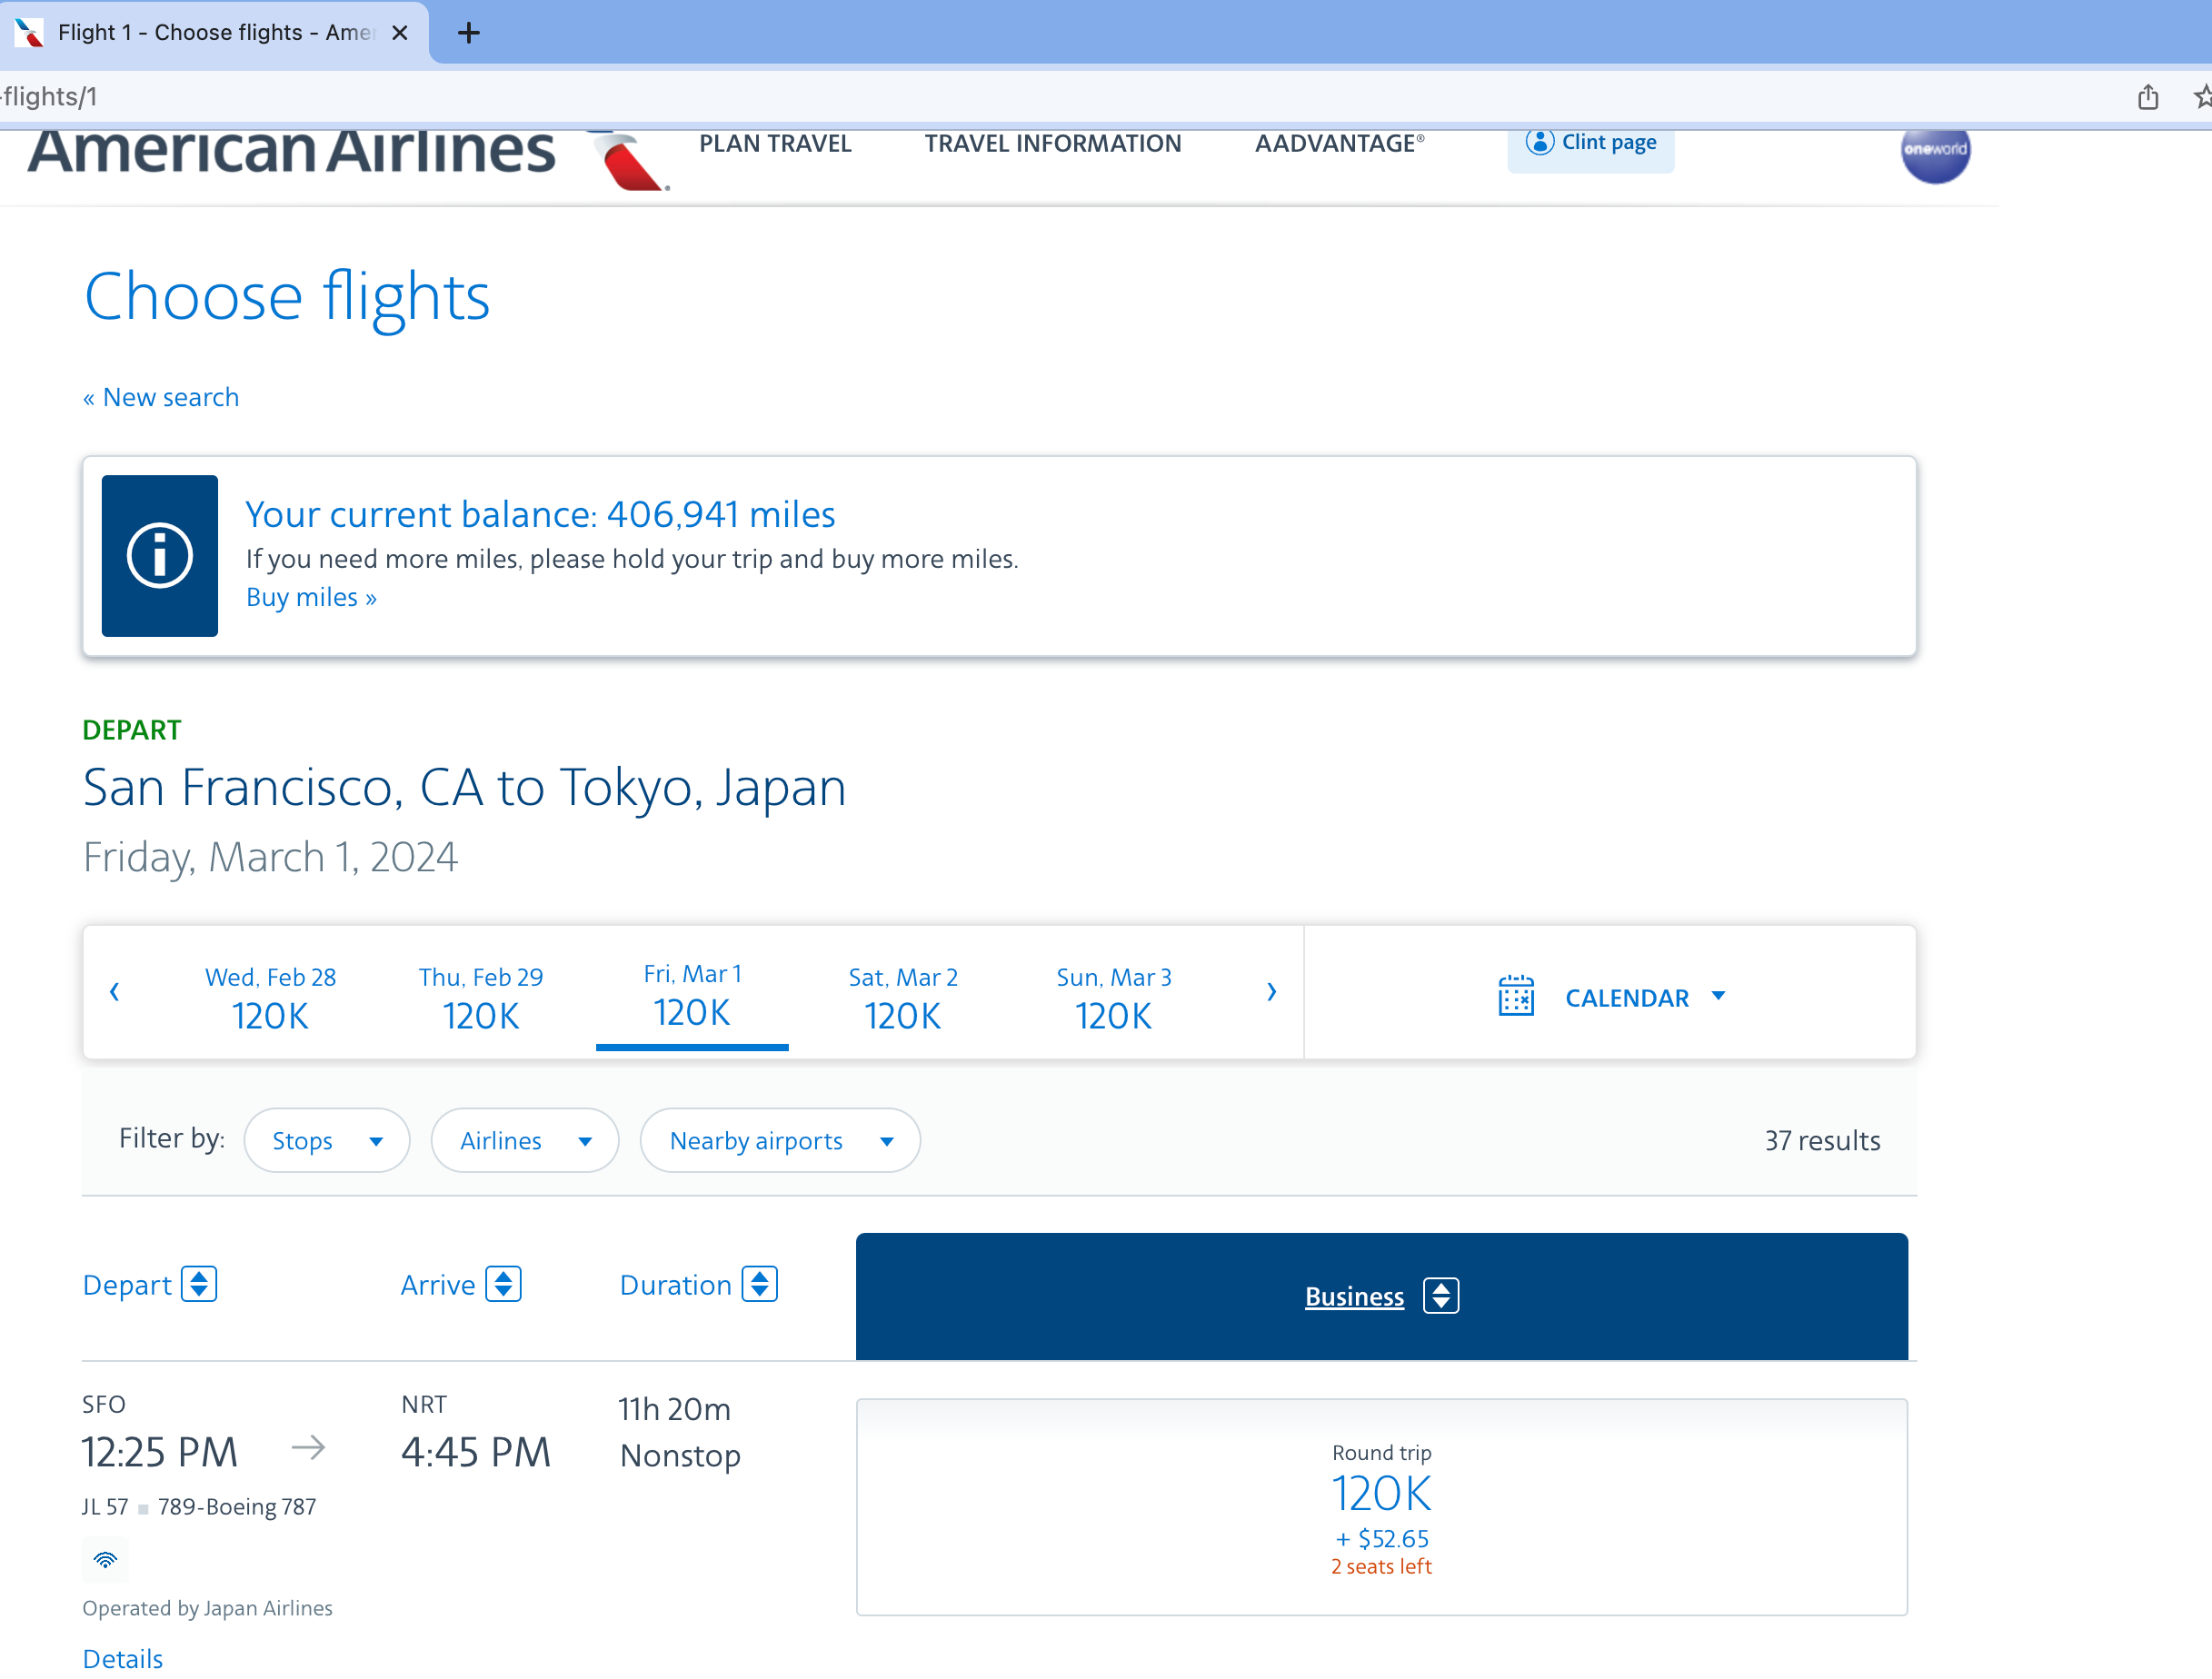 Award availability for business class flights to Japan. 